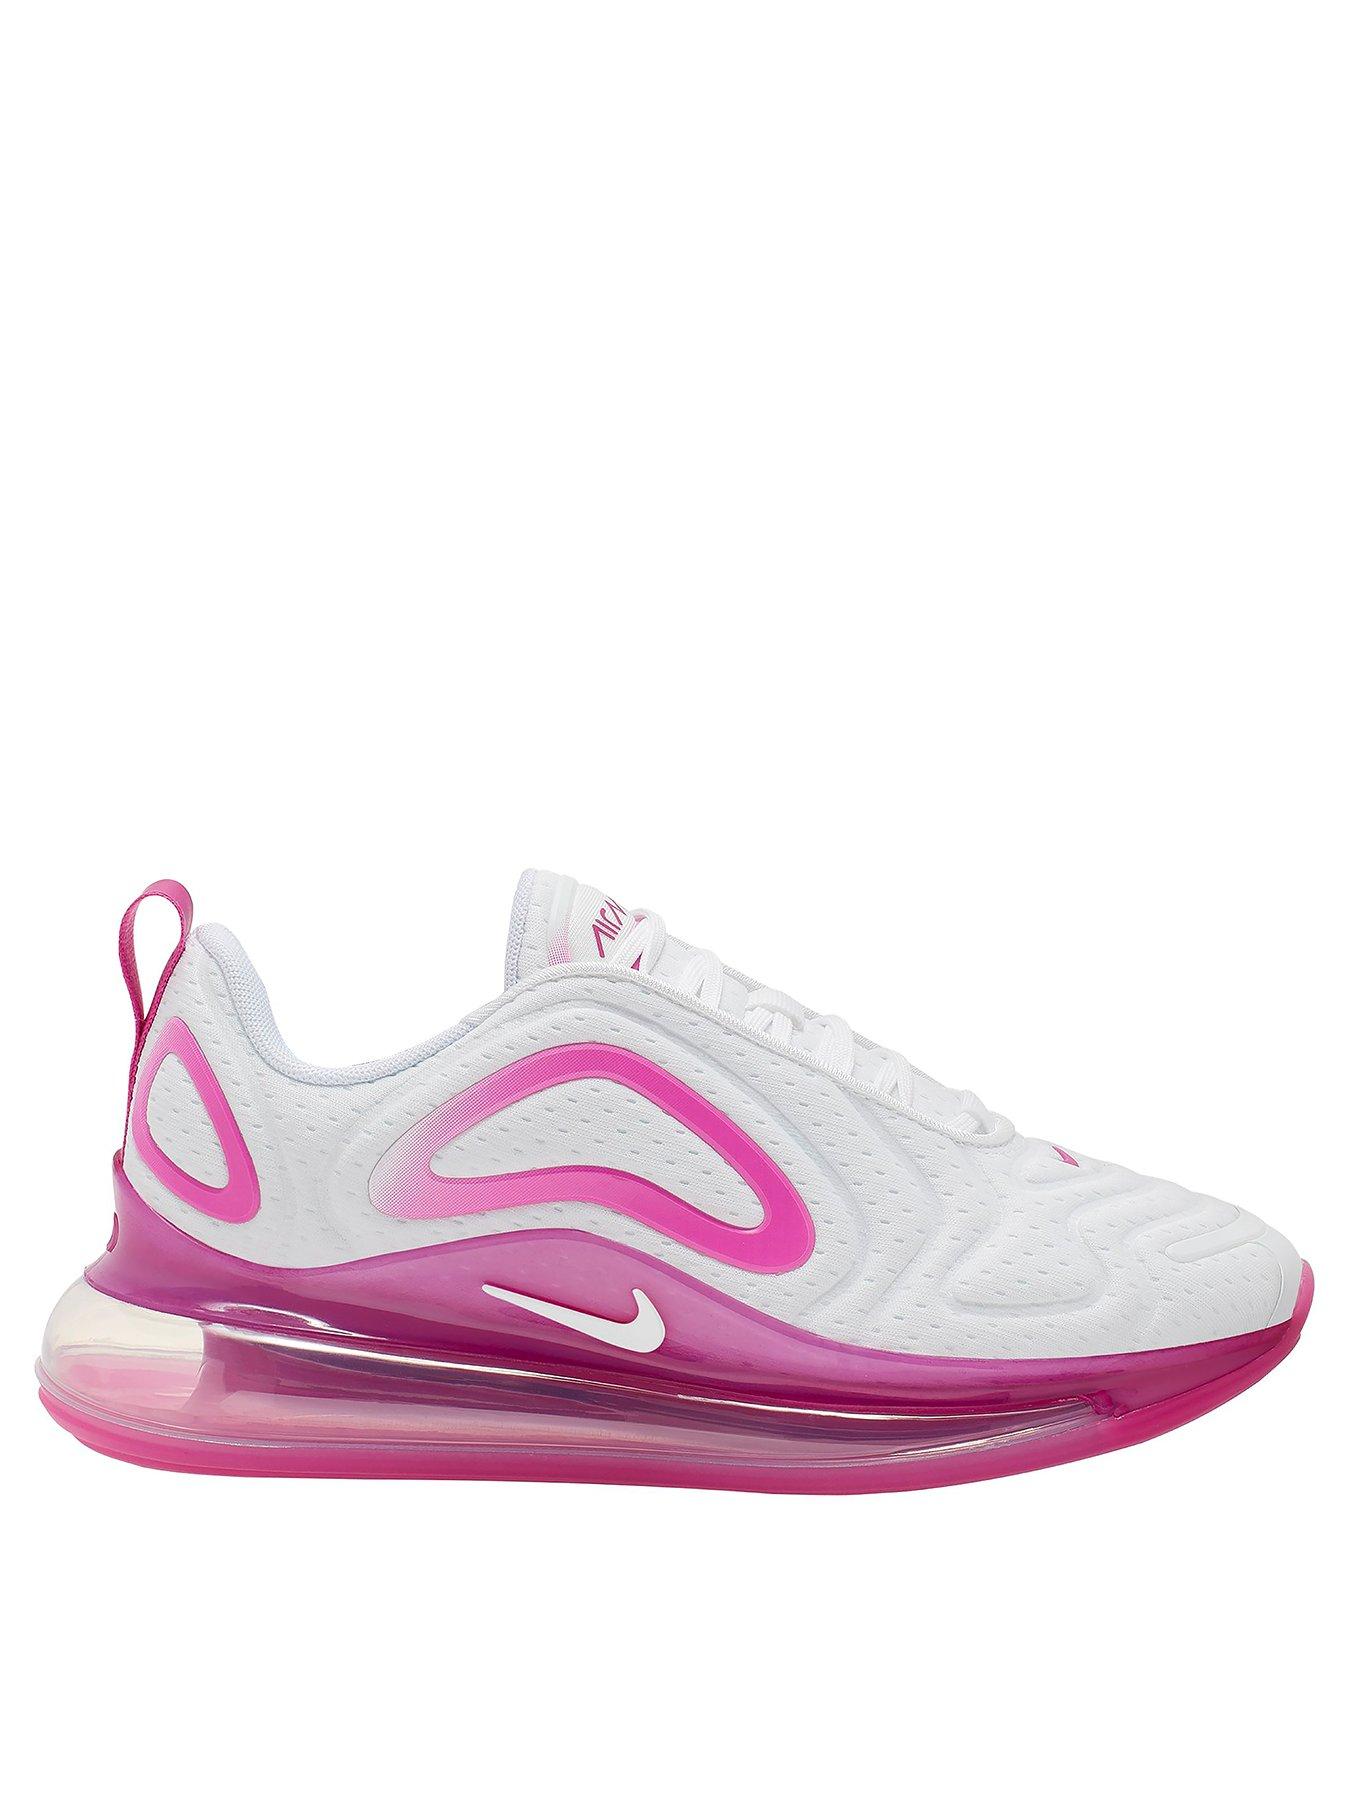 nike air 720 pink and white